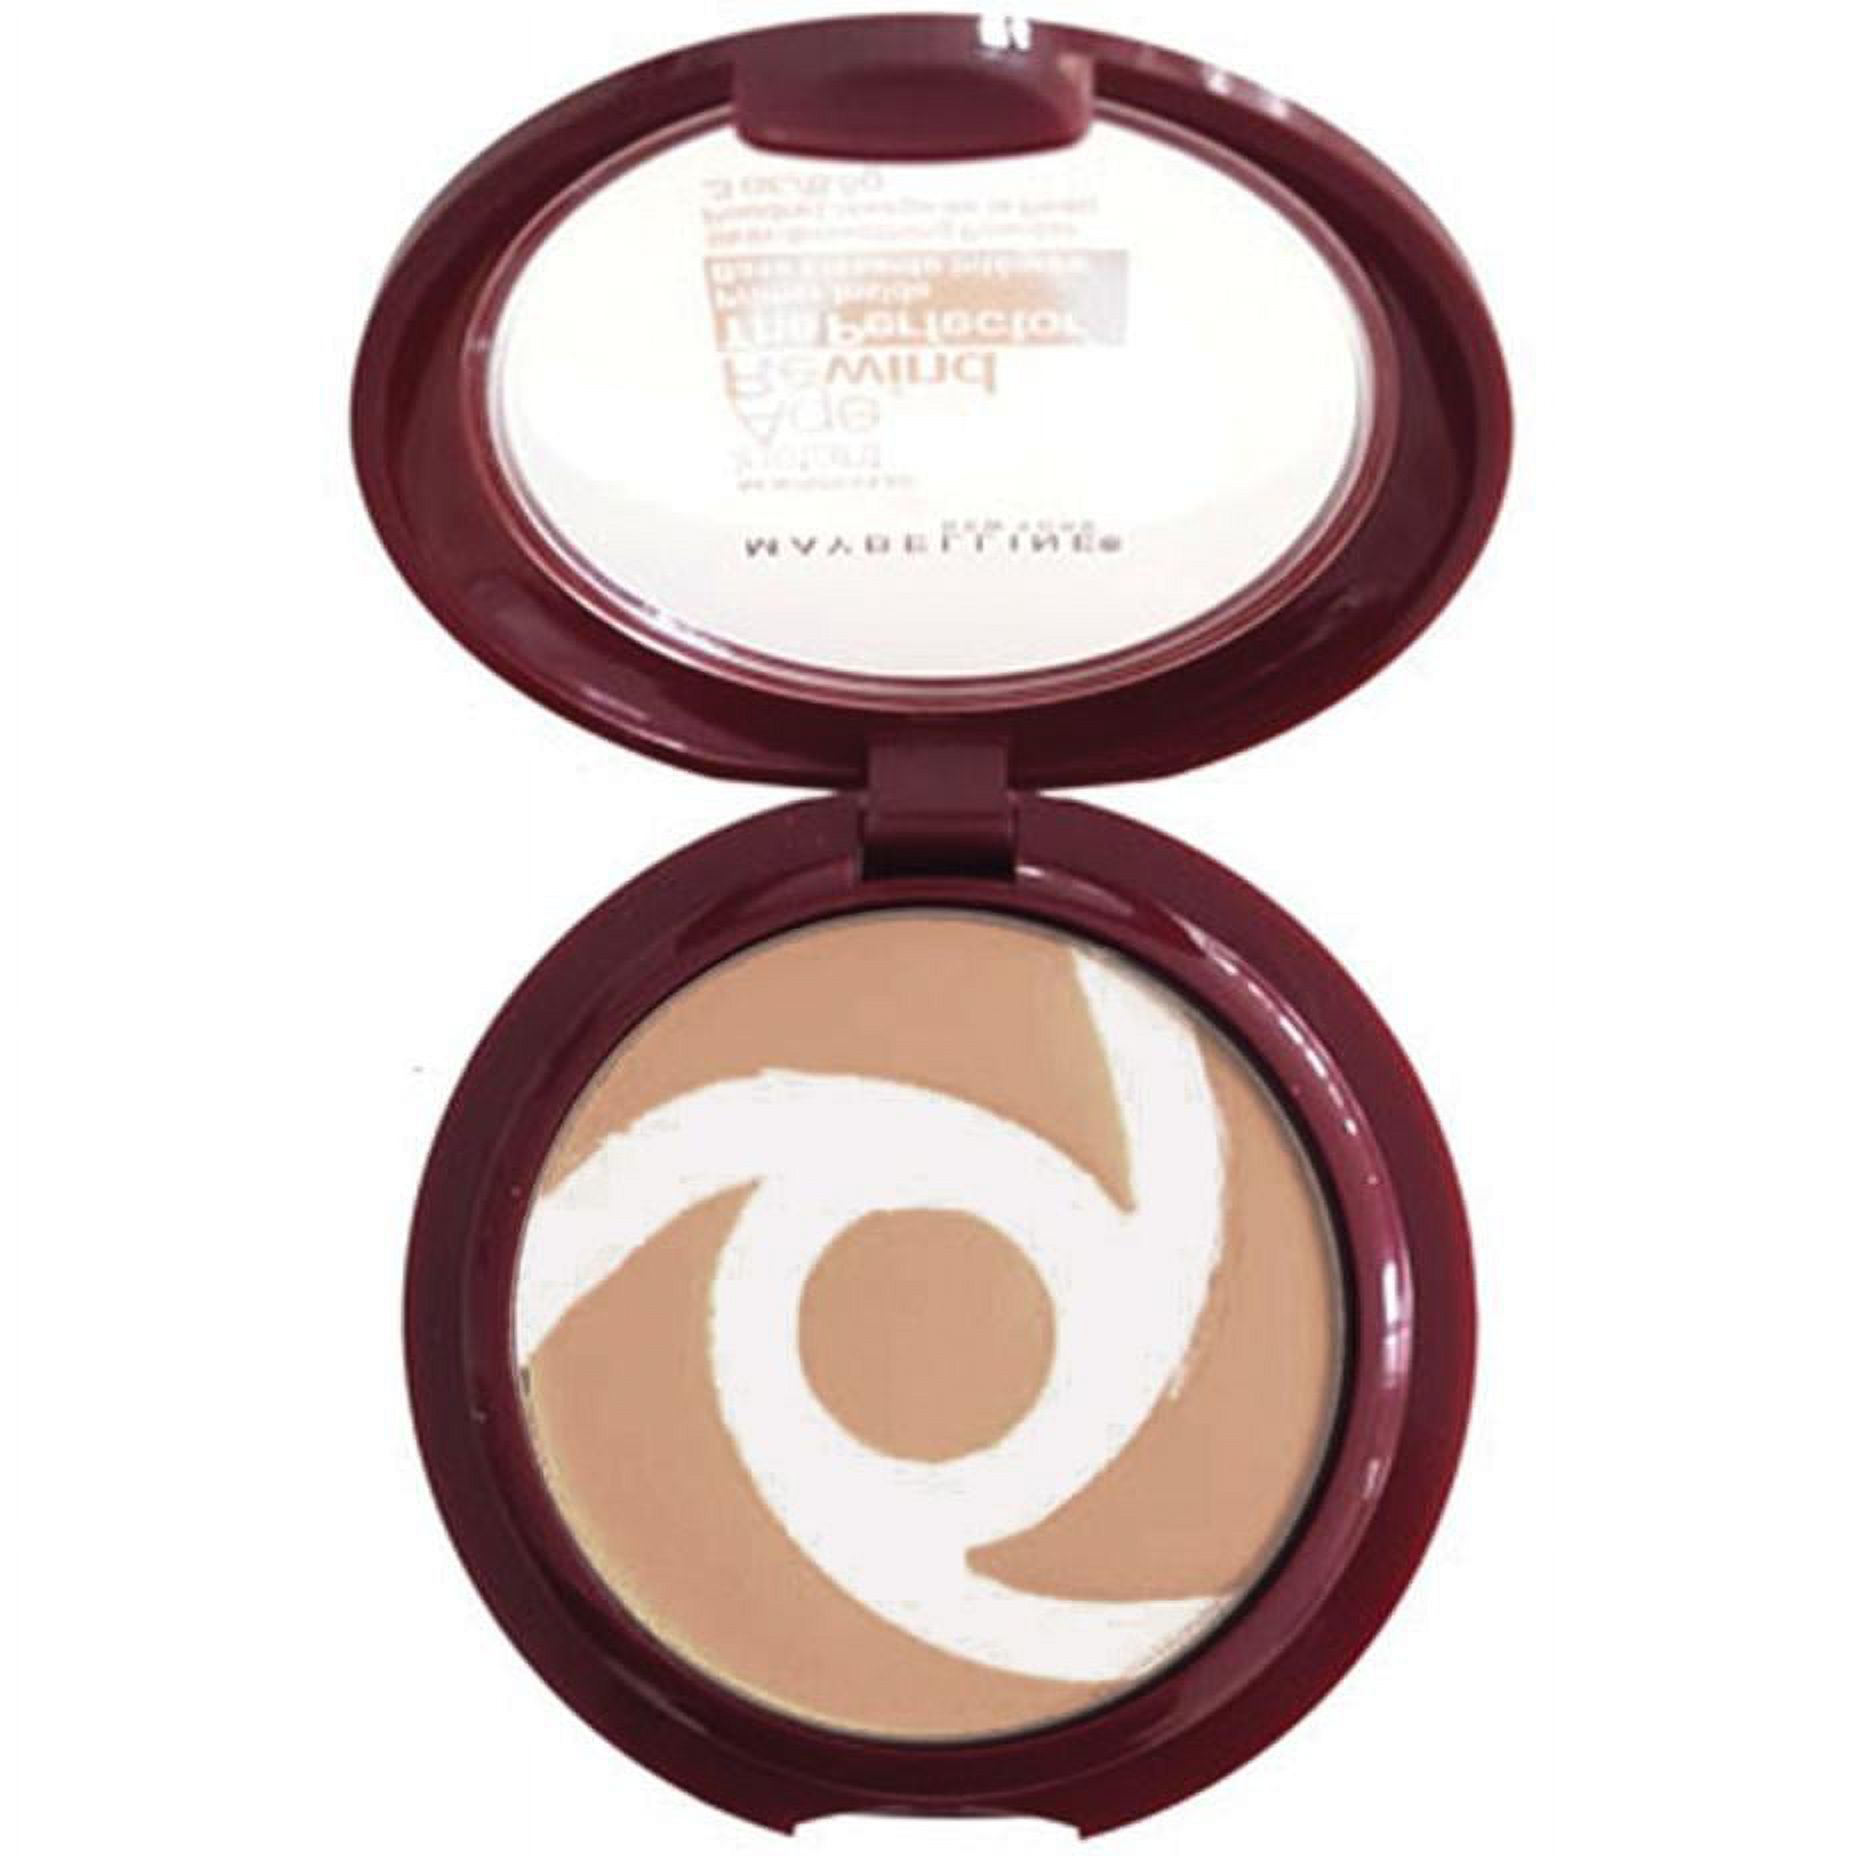 Maybelline Instant Age Rewind The Perfector Primer Powder, Light - image 4 of 7